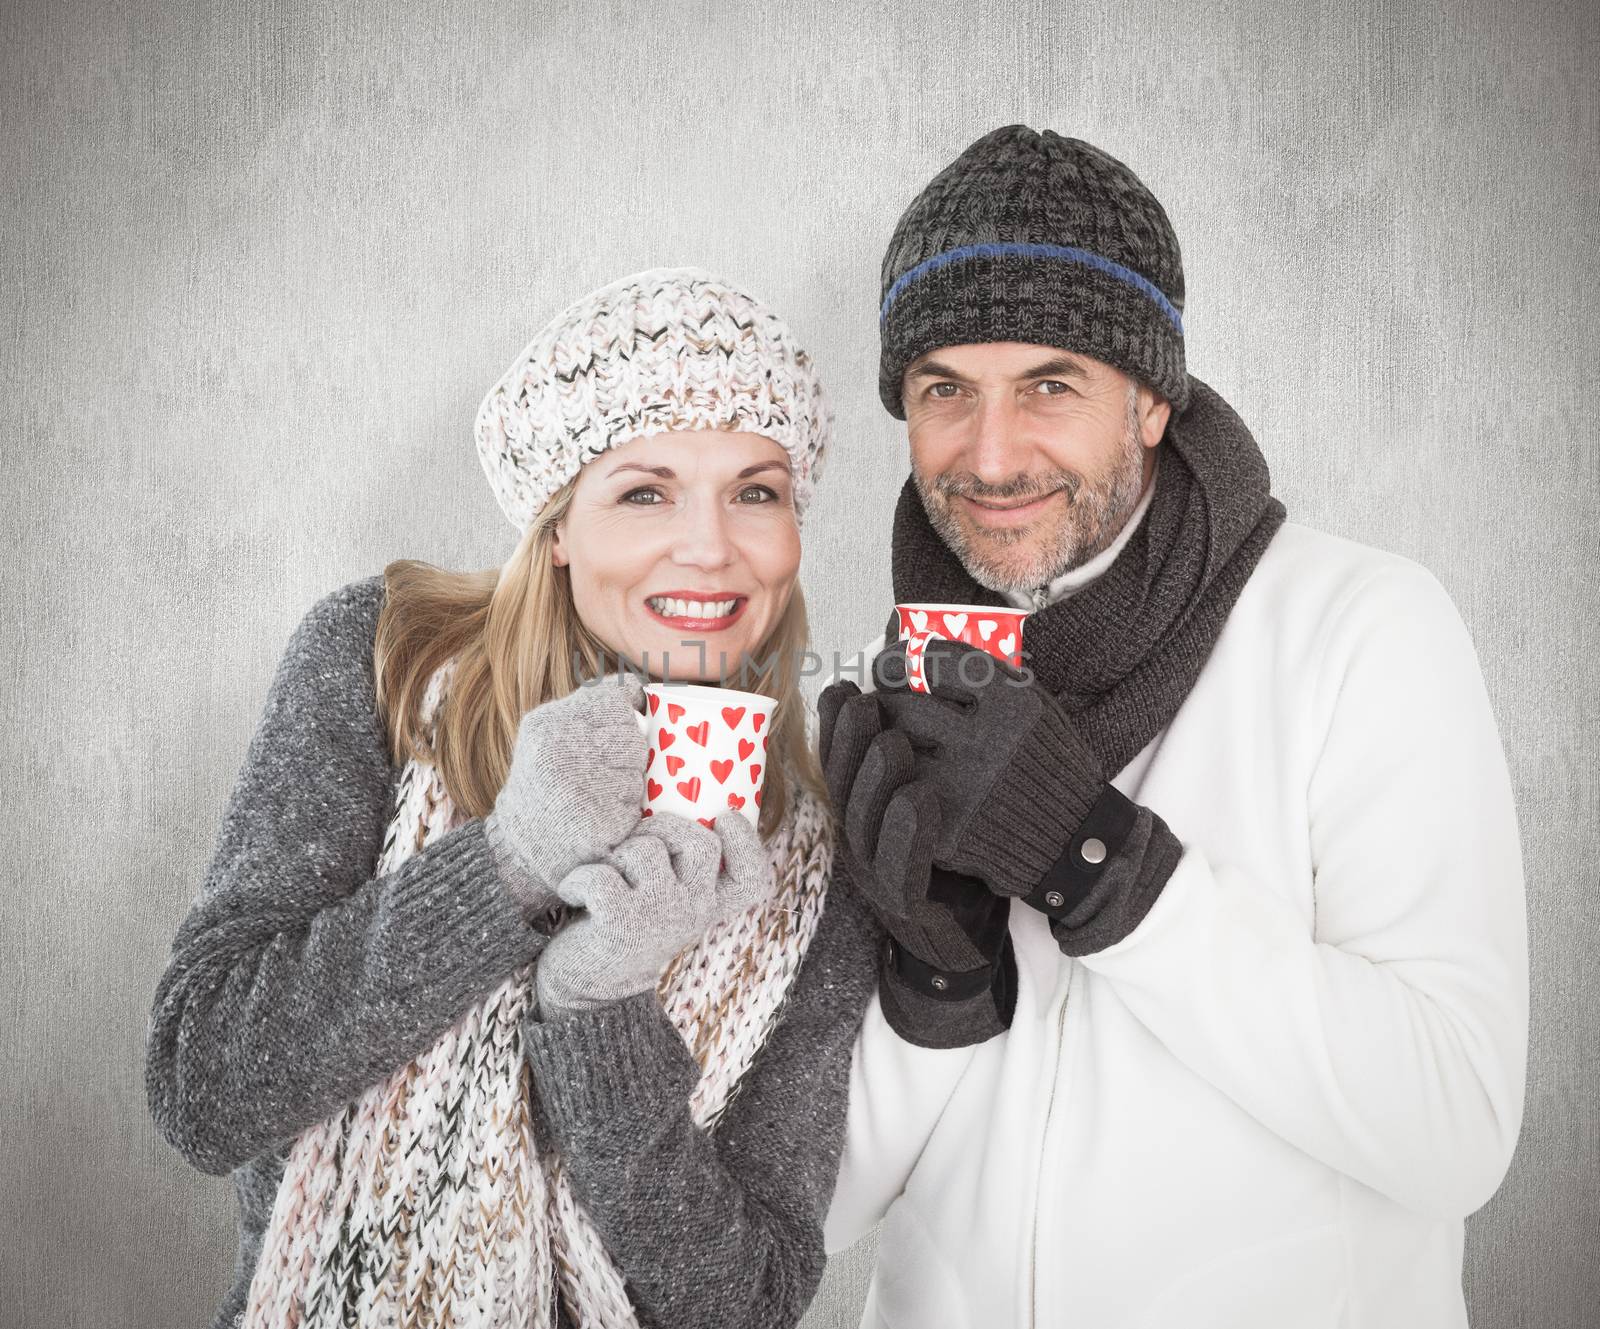 Happy couple in winter fashion holding mugs against weathered surface 